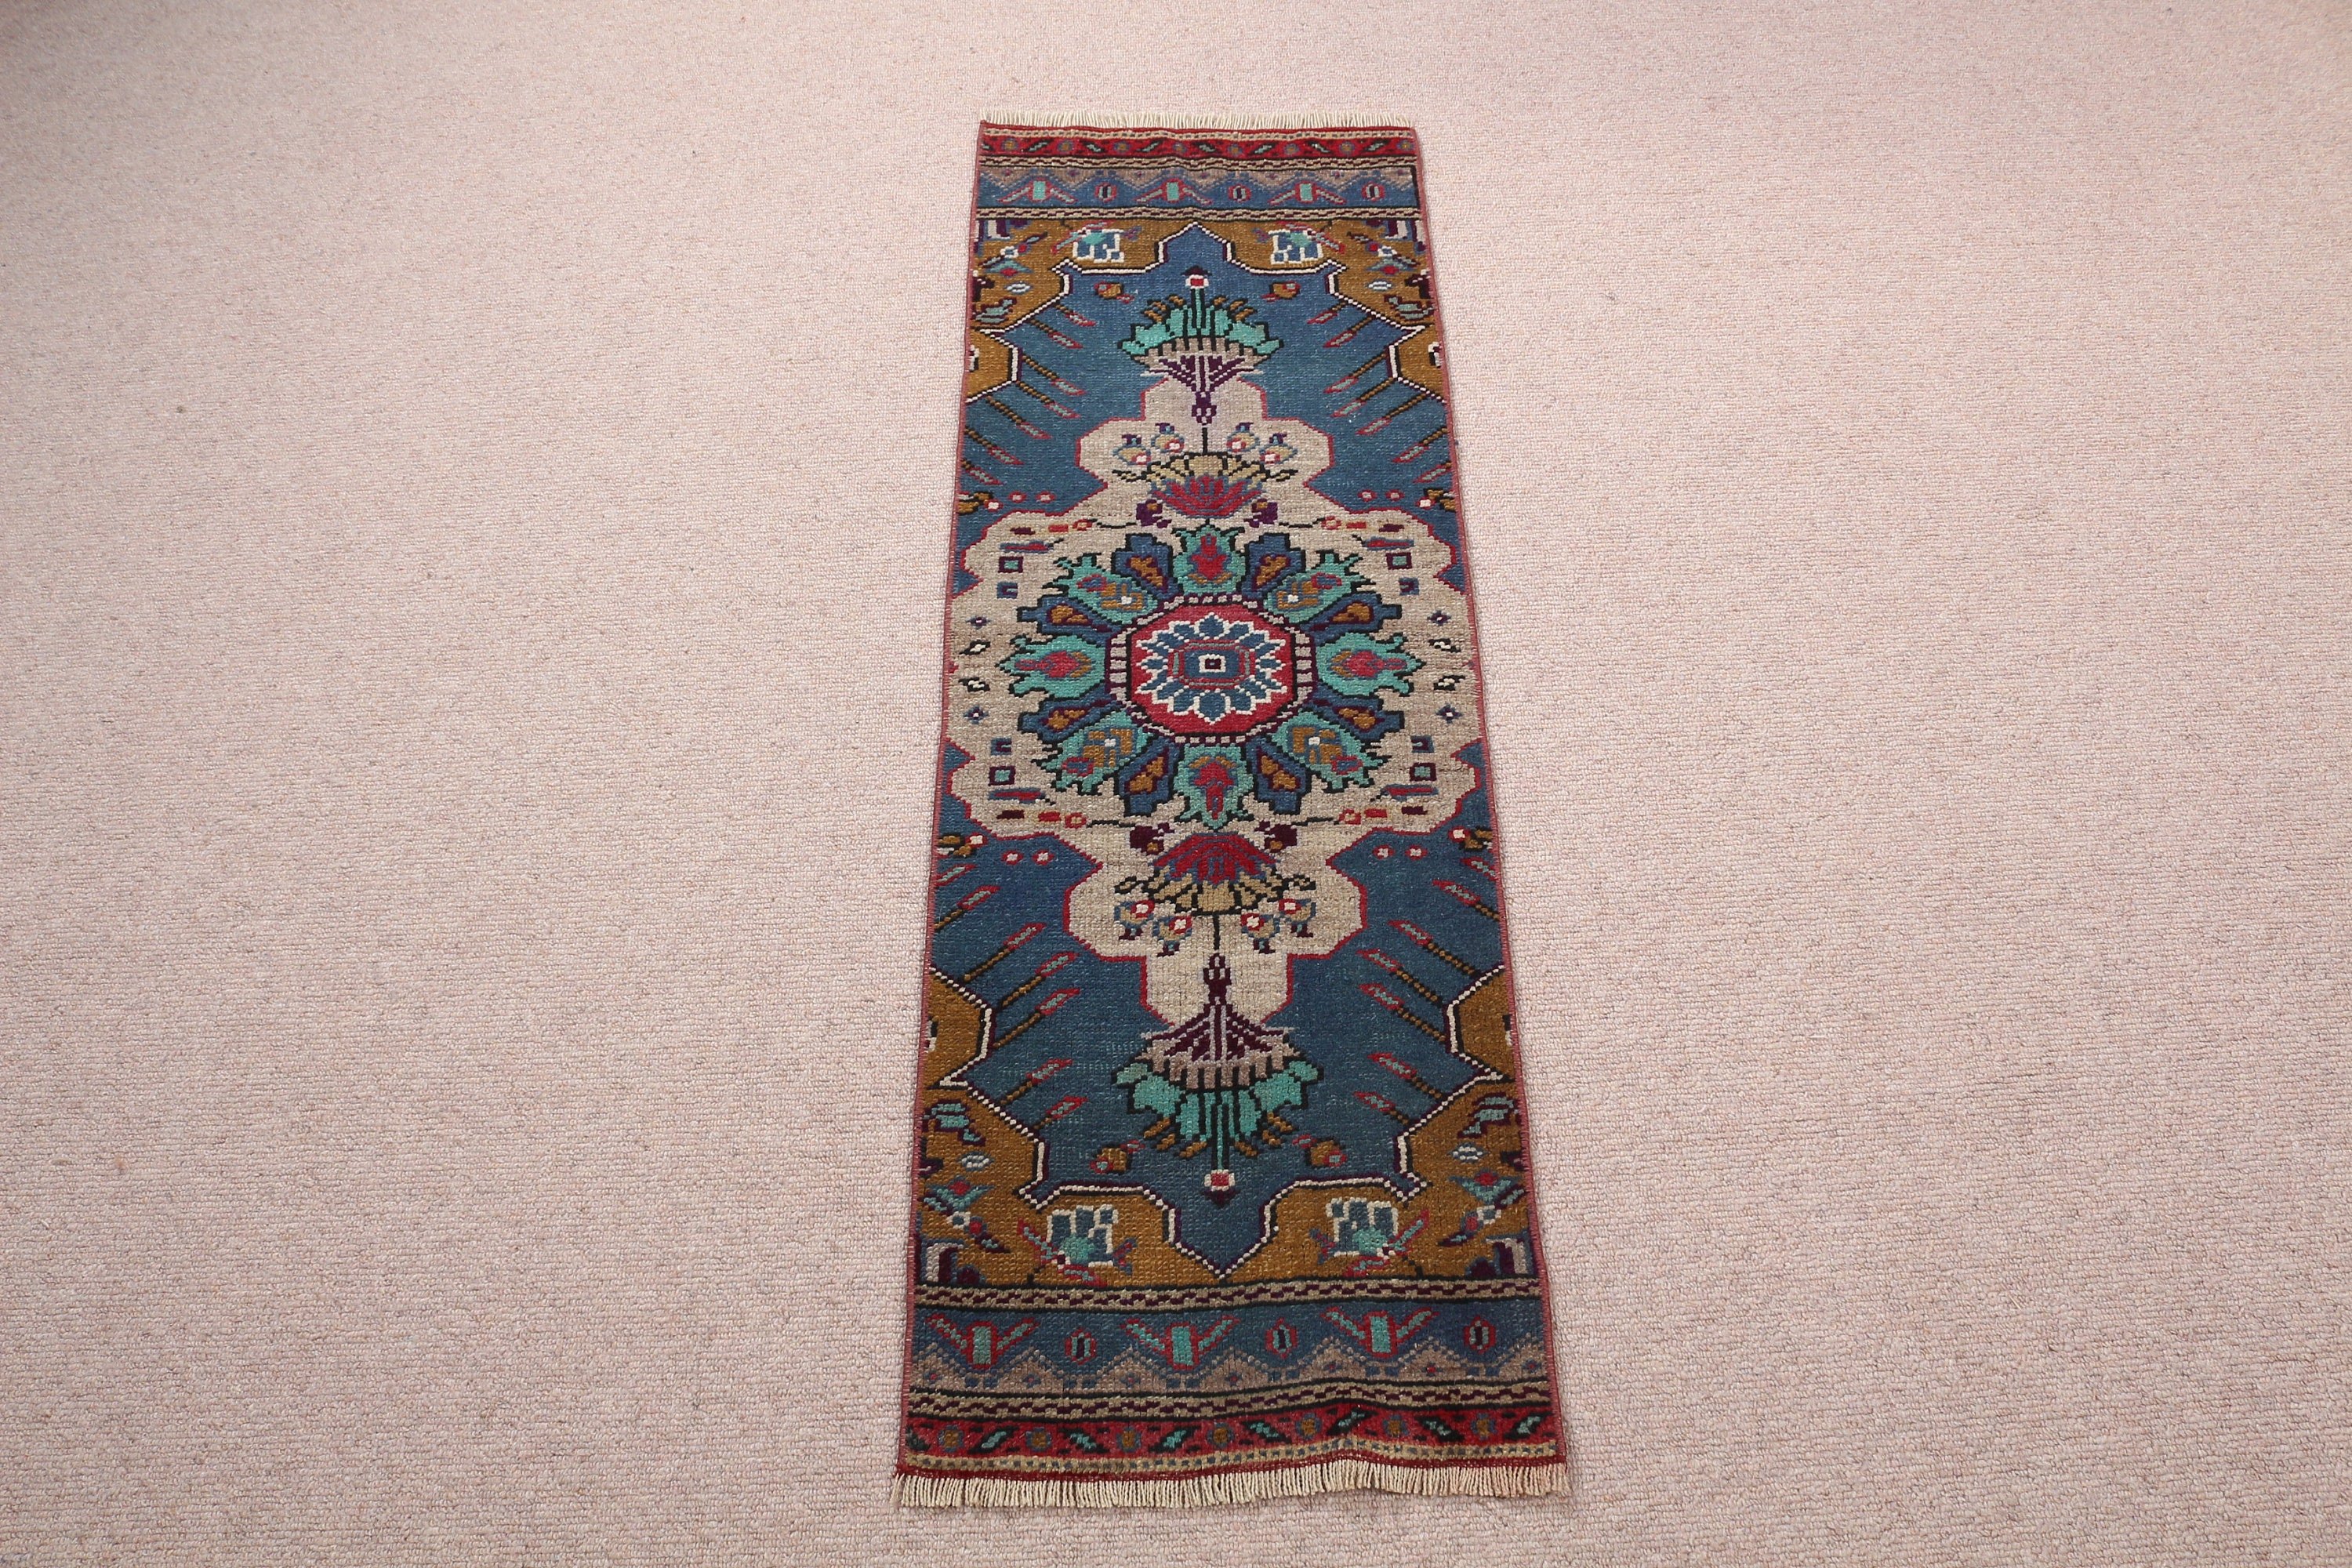 Turkish Rugs, Vintage Rug, Antique Rugs, Rugs for Kitchen, Bedroom Rugs, Blue  1.3x3.8 ft Small Rugs, Entry Rug, Floor Rugs